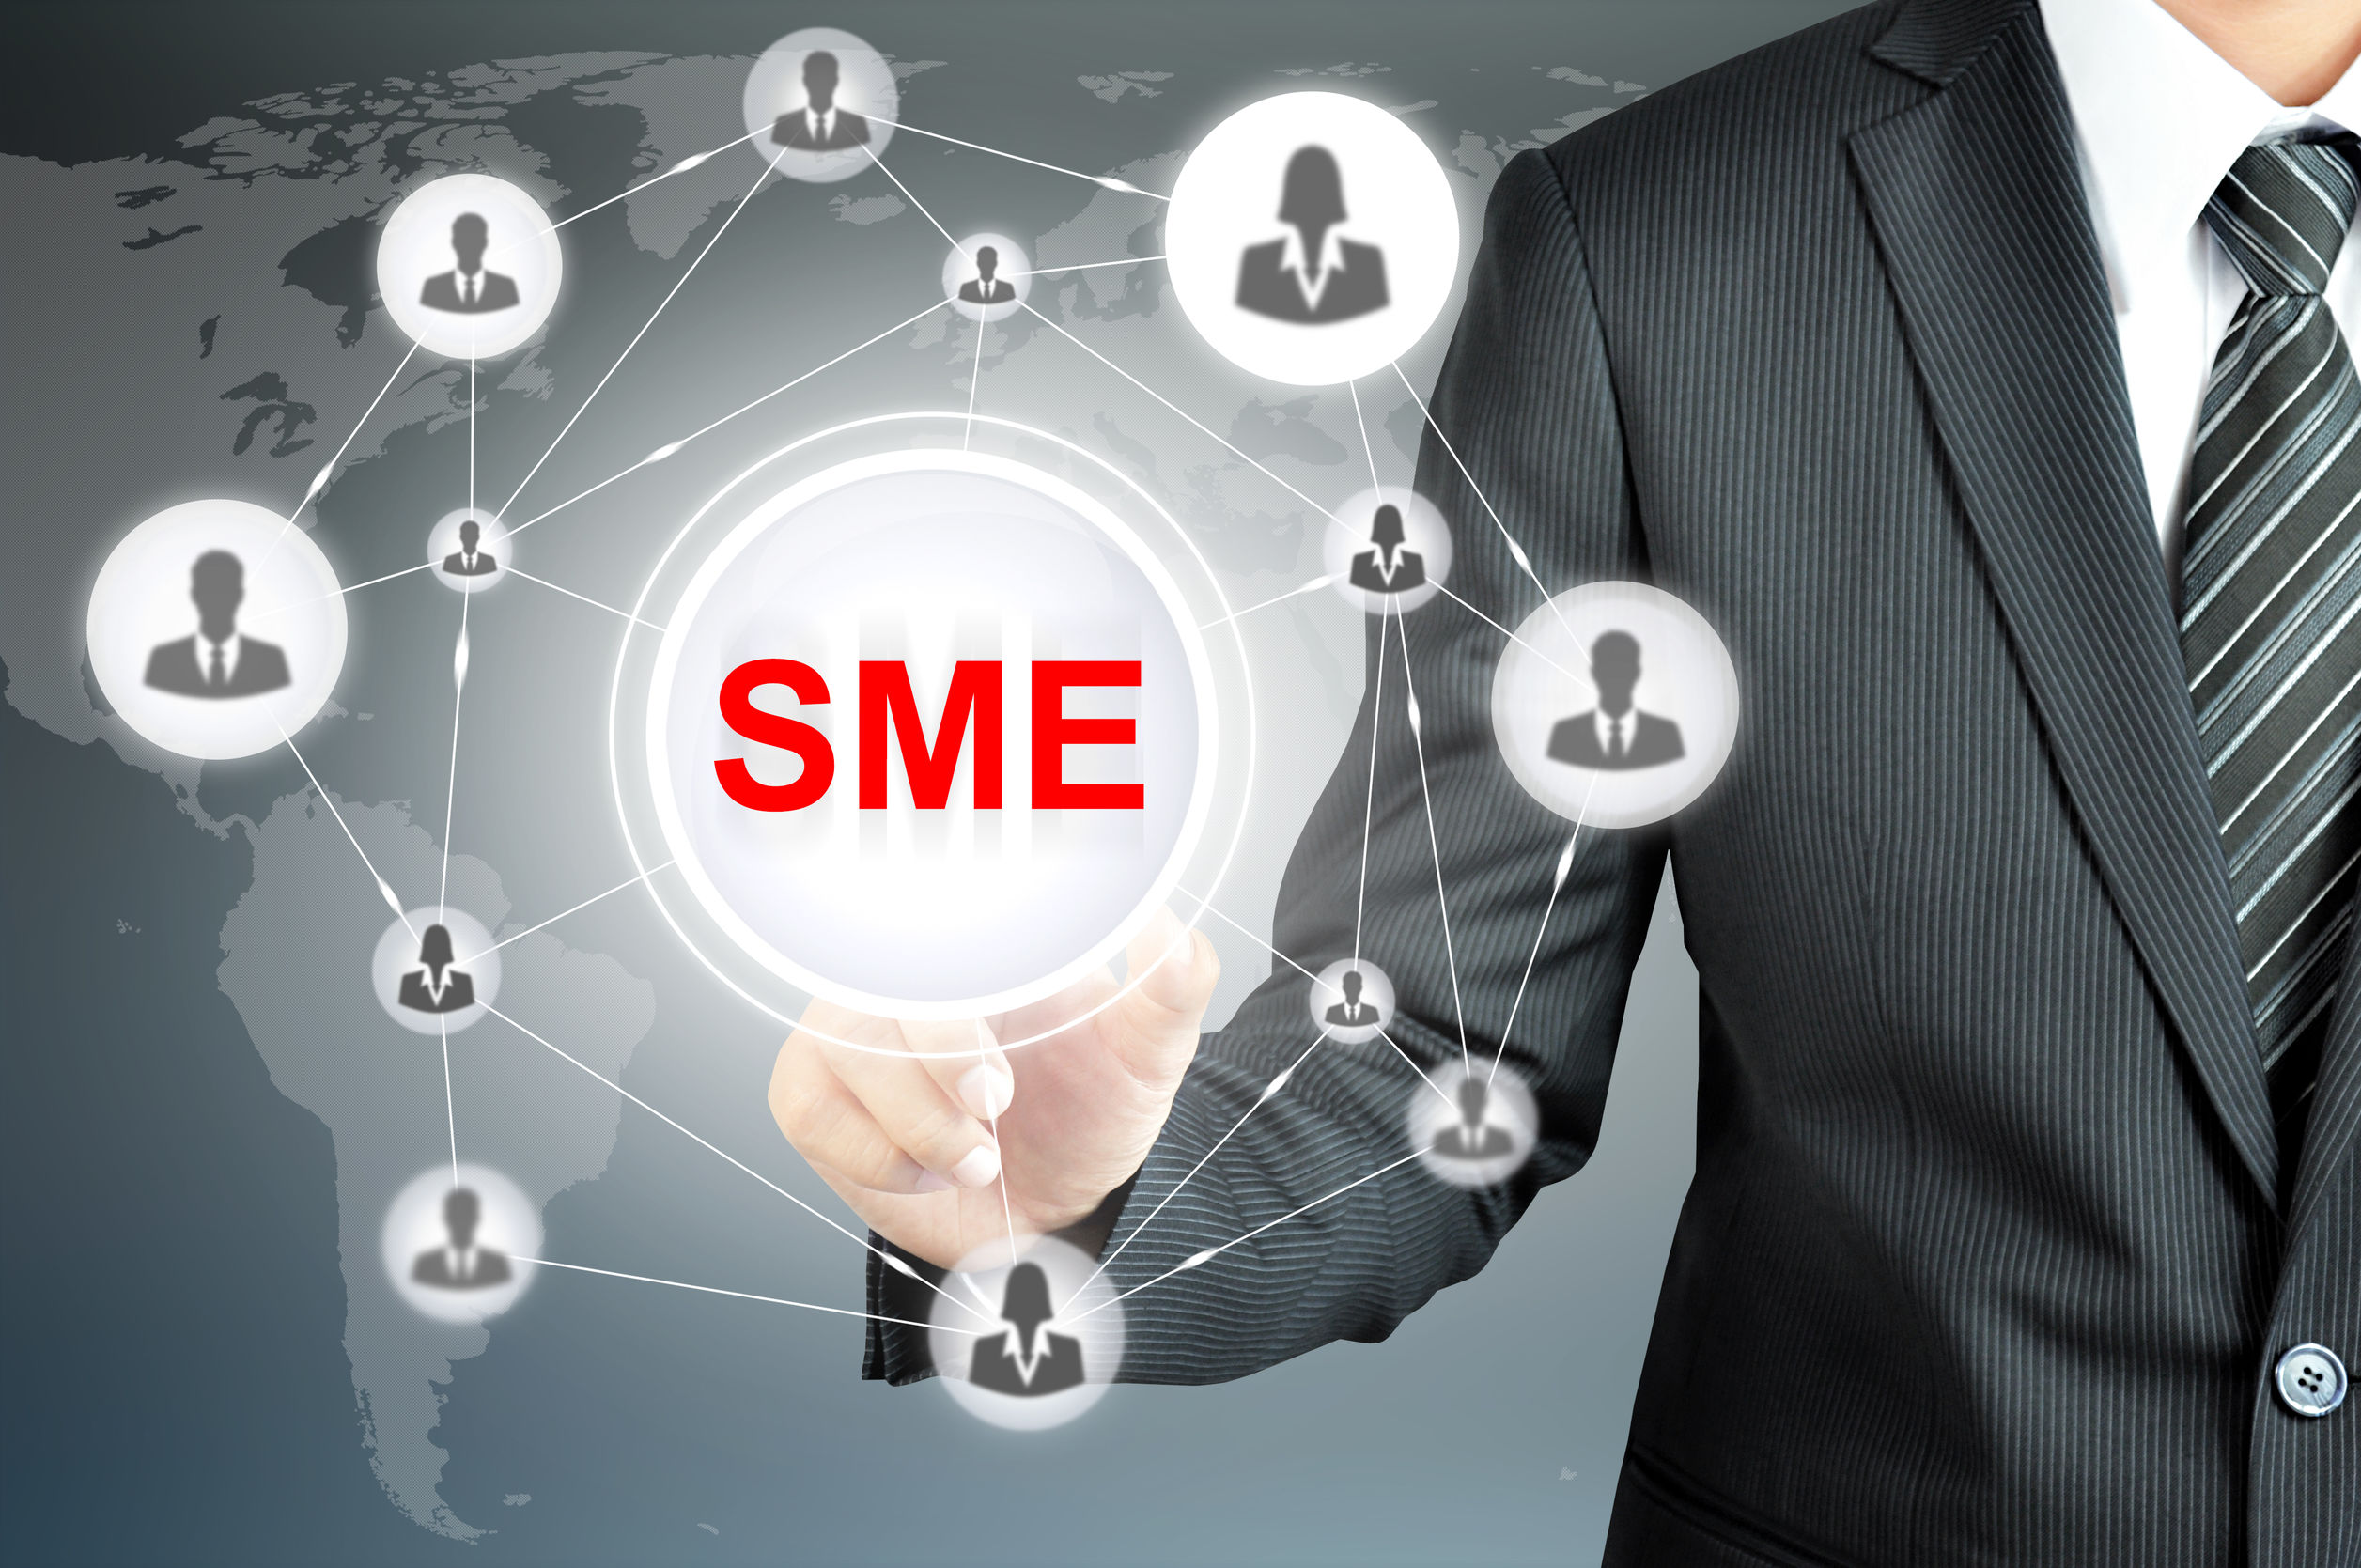 Businessman pointing on SME (Small & Medium Enterprise) sign on virtual screen with people icons linked as network